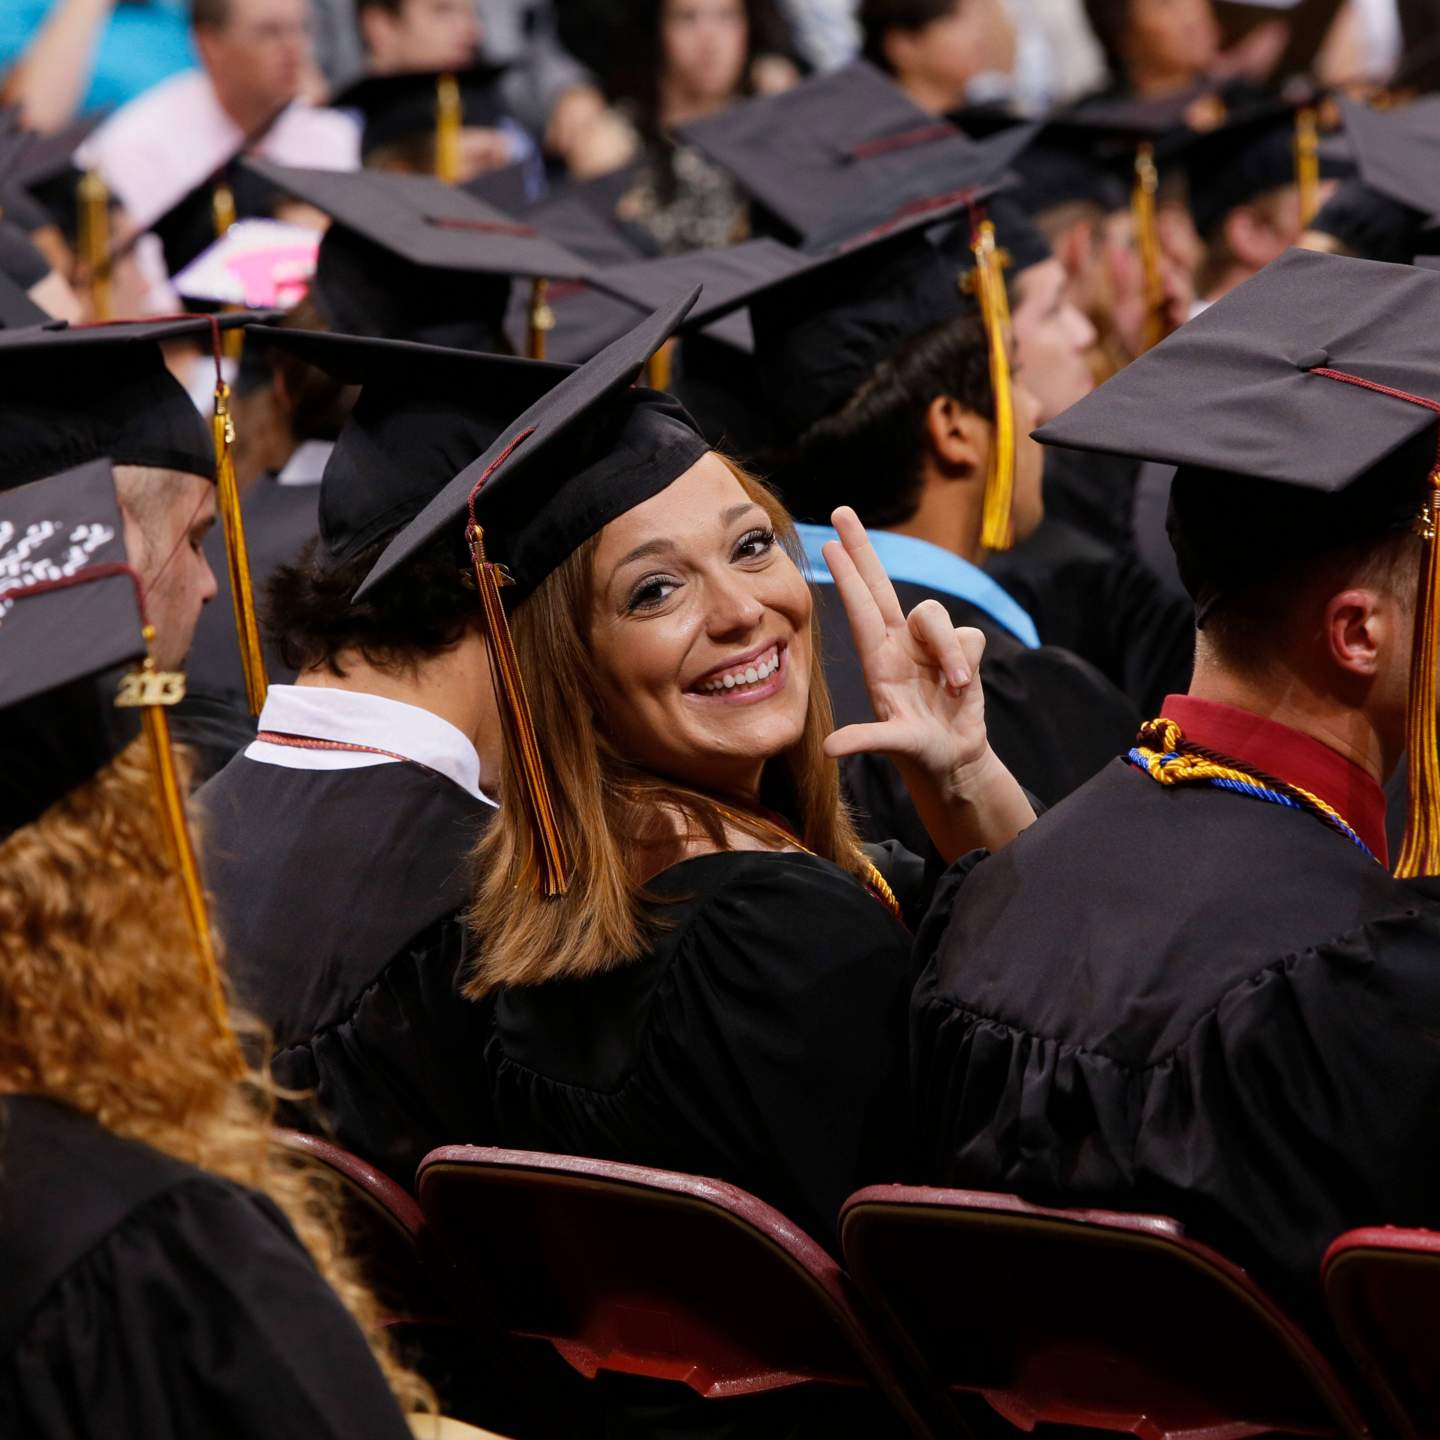 Graduate doing "The Heart of Texas State Hand Sign"